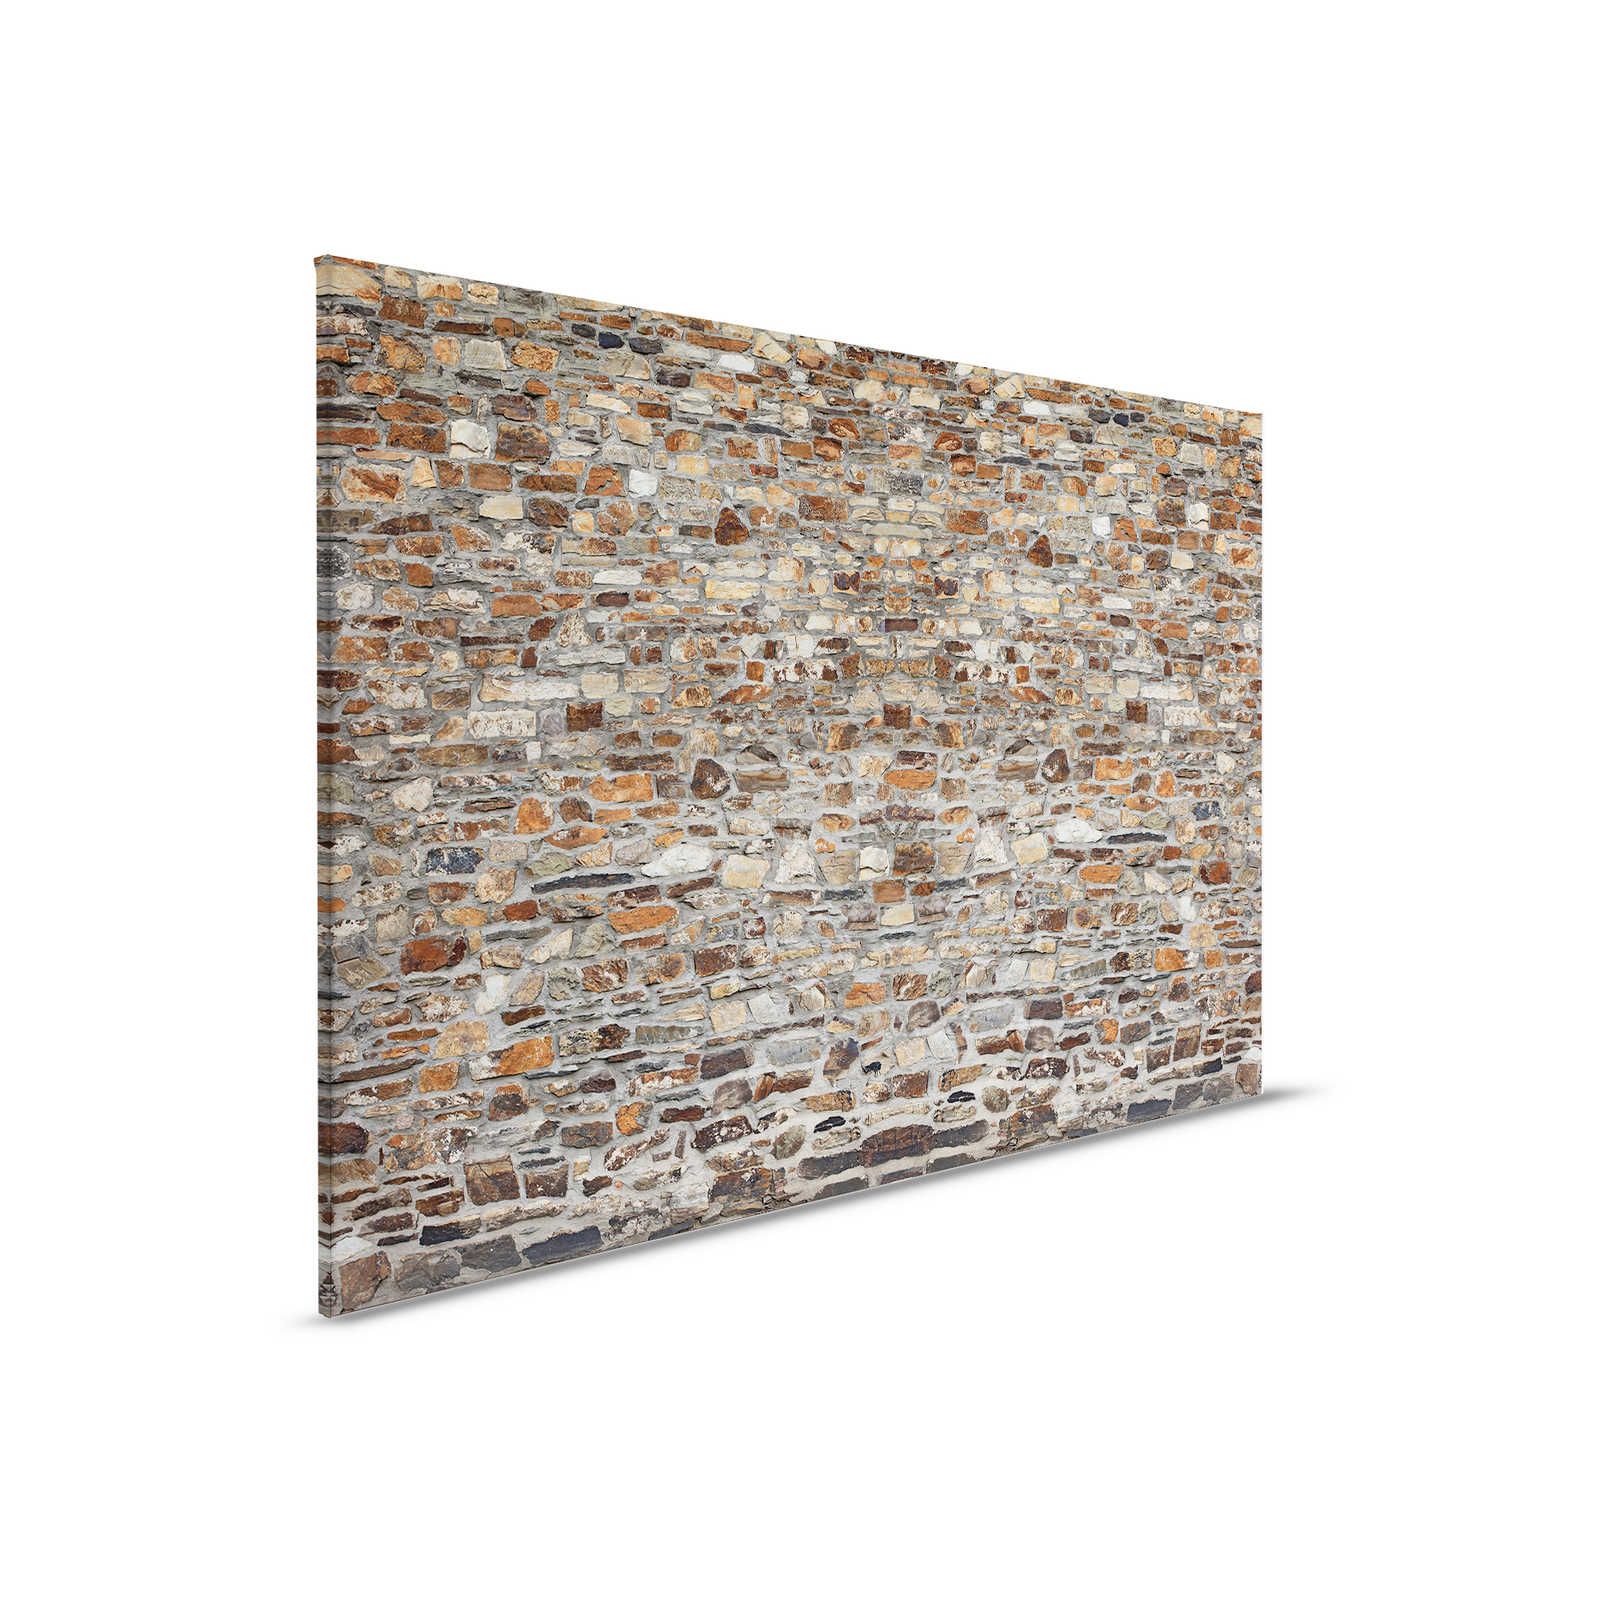         Canvas painting 3D Wall old bricks & rustic stone look - 0.90 m x 0.60 m
    